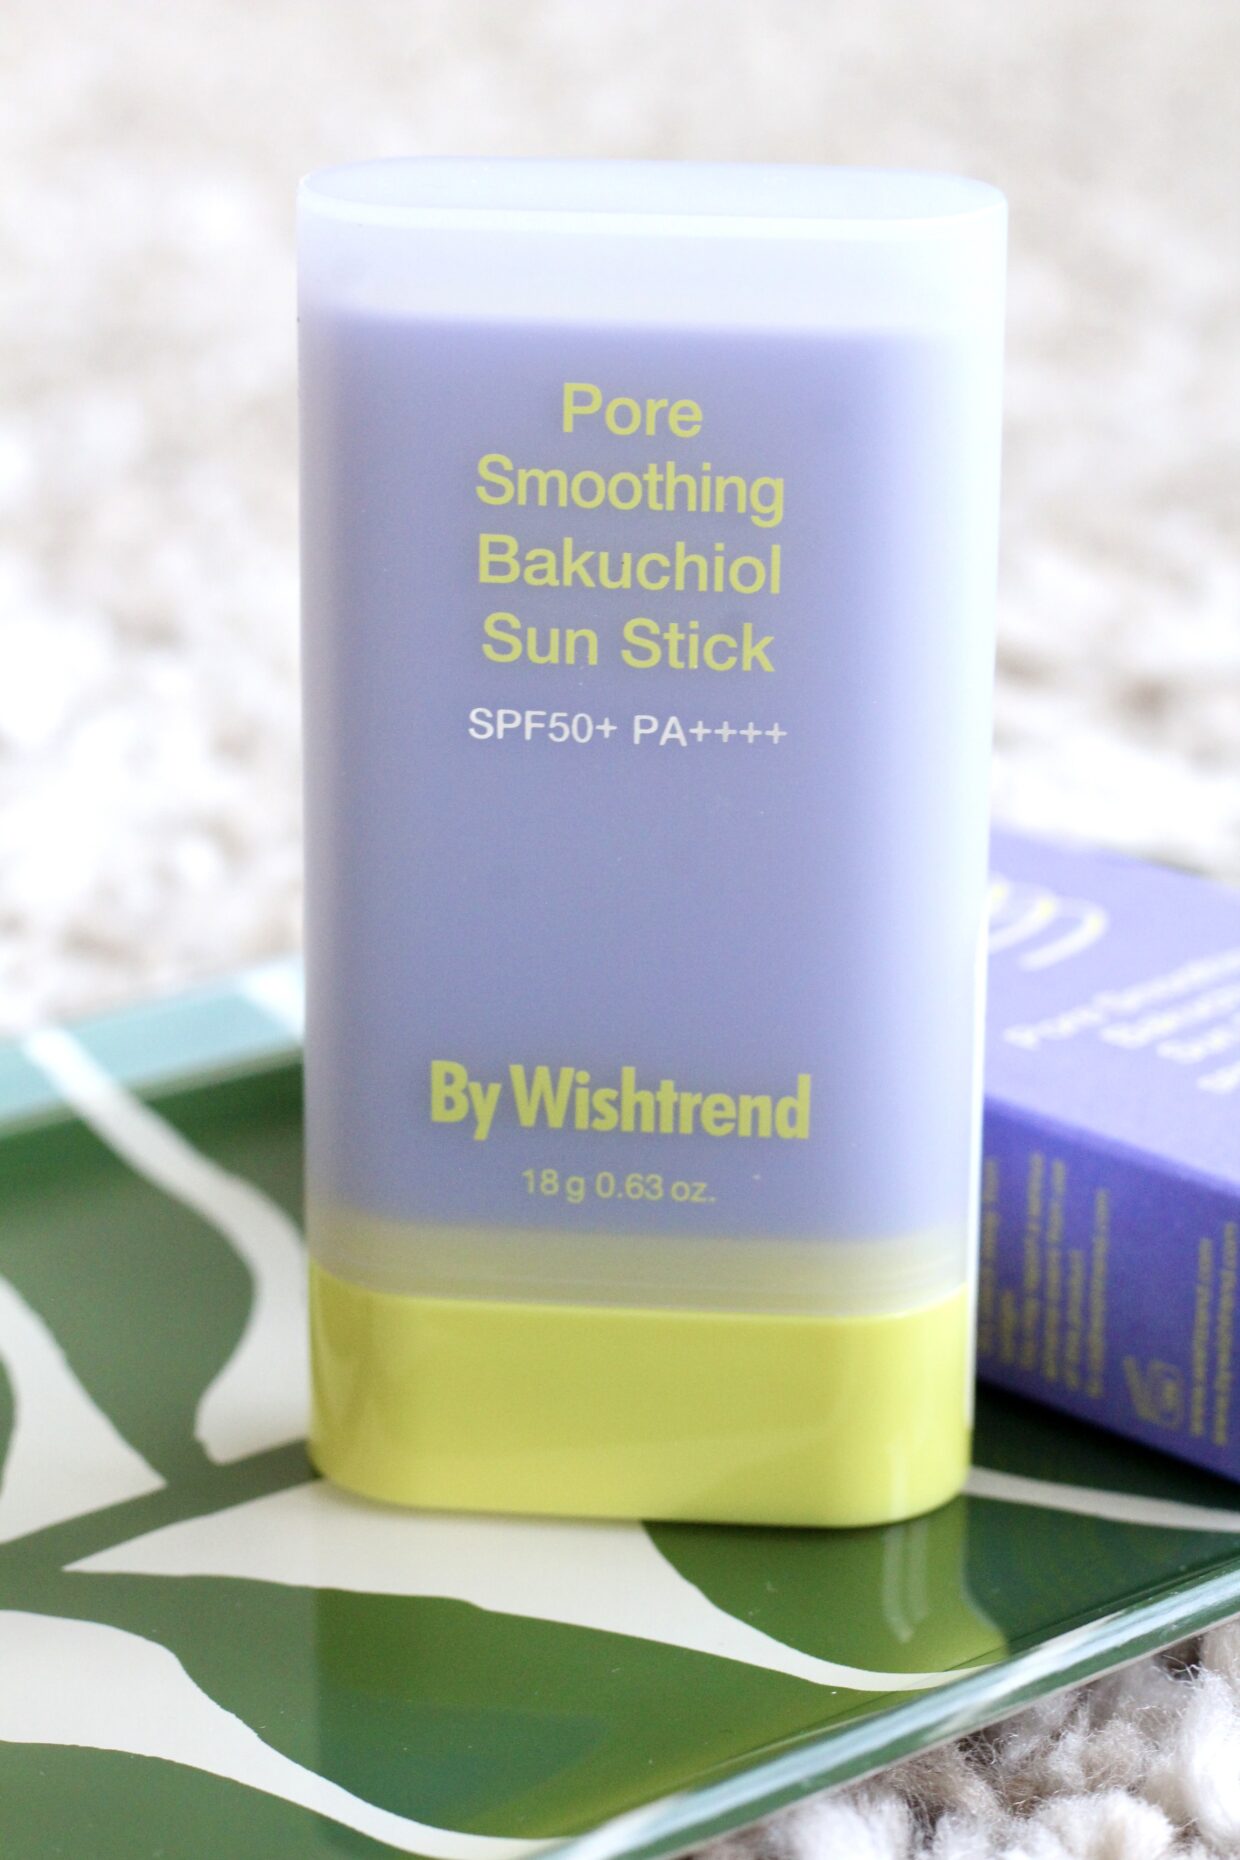 By Wishtrend Pore Smoothing Bakuchiol Sun Stick